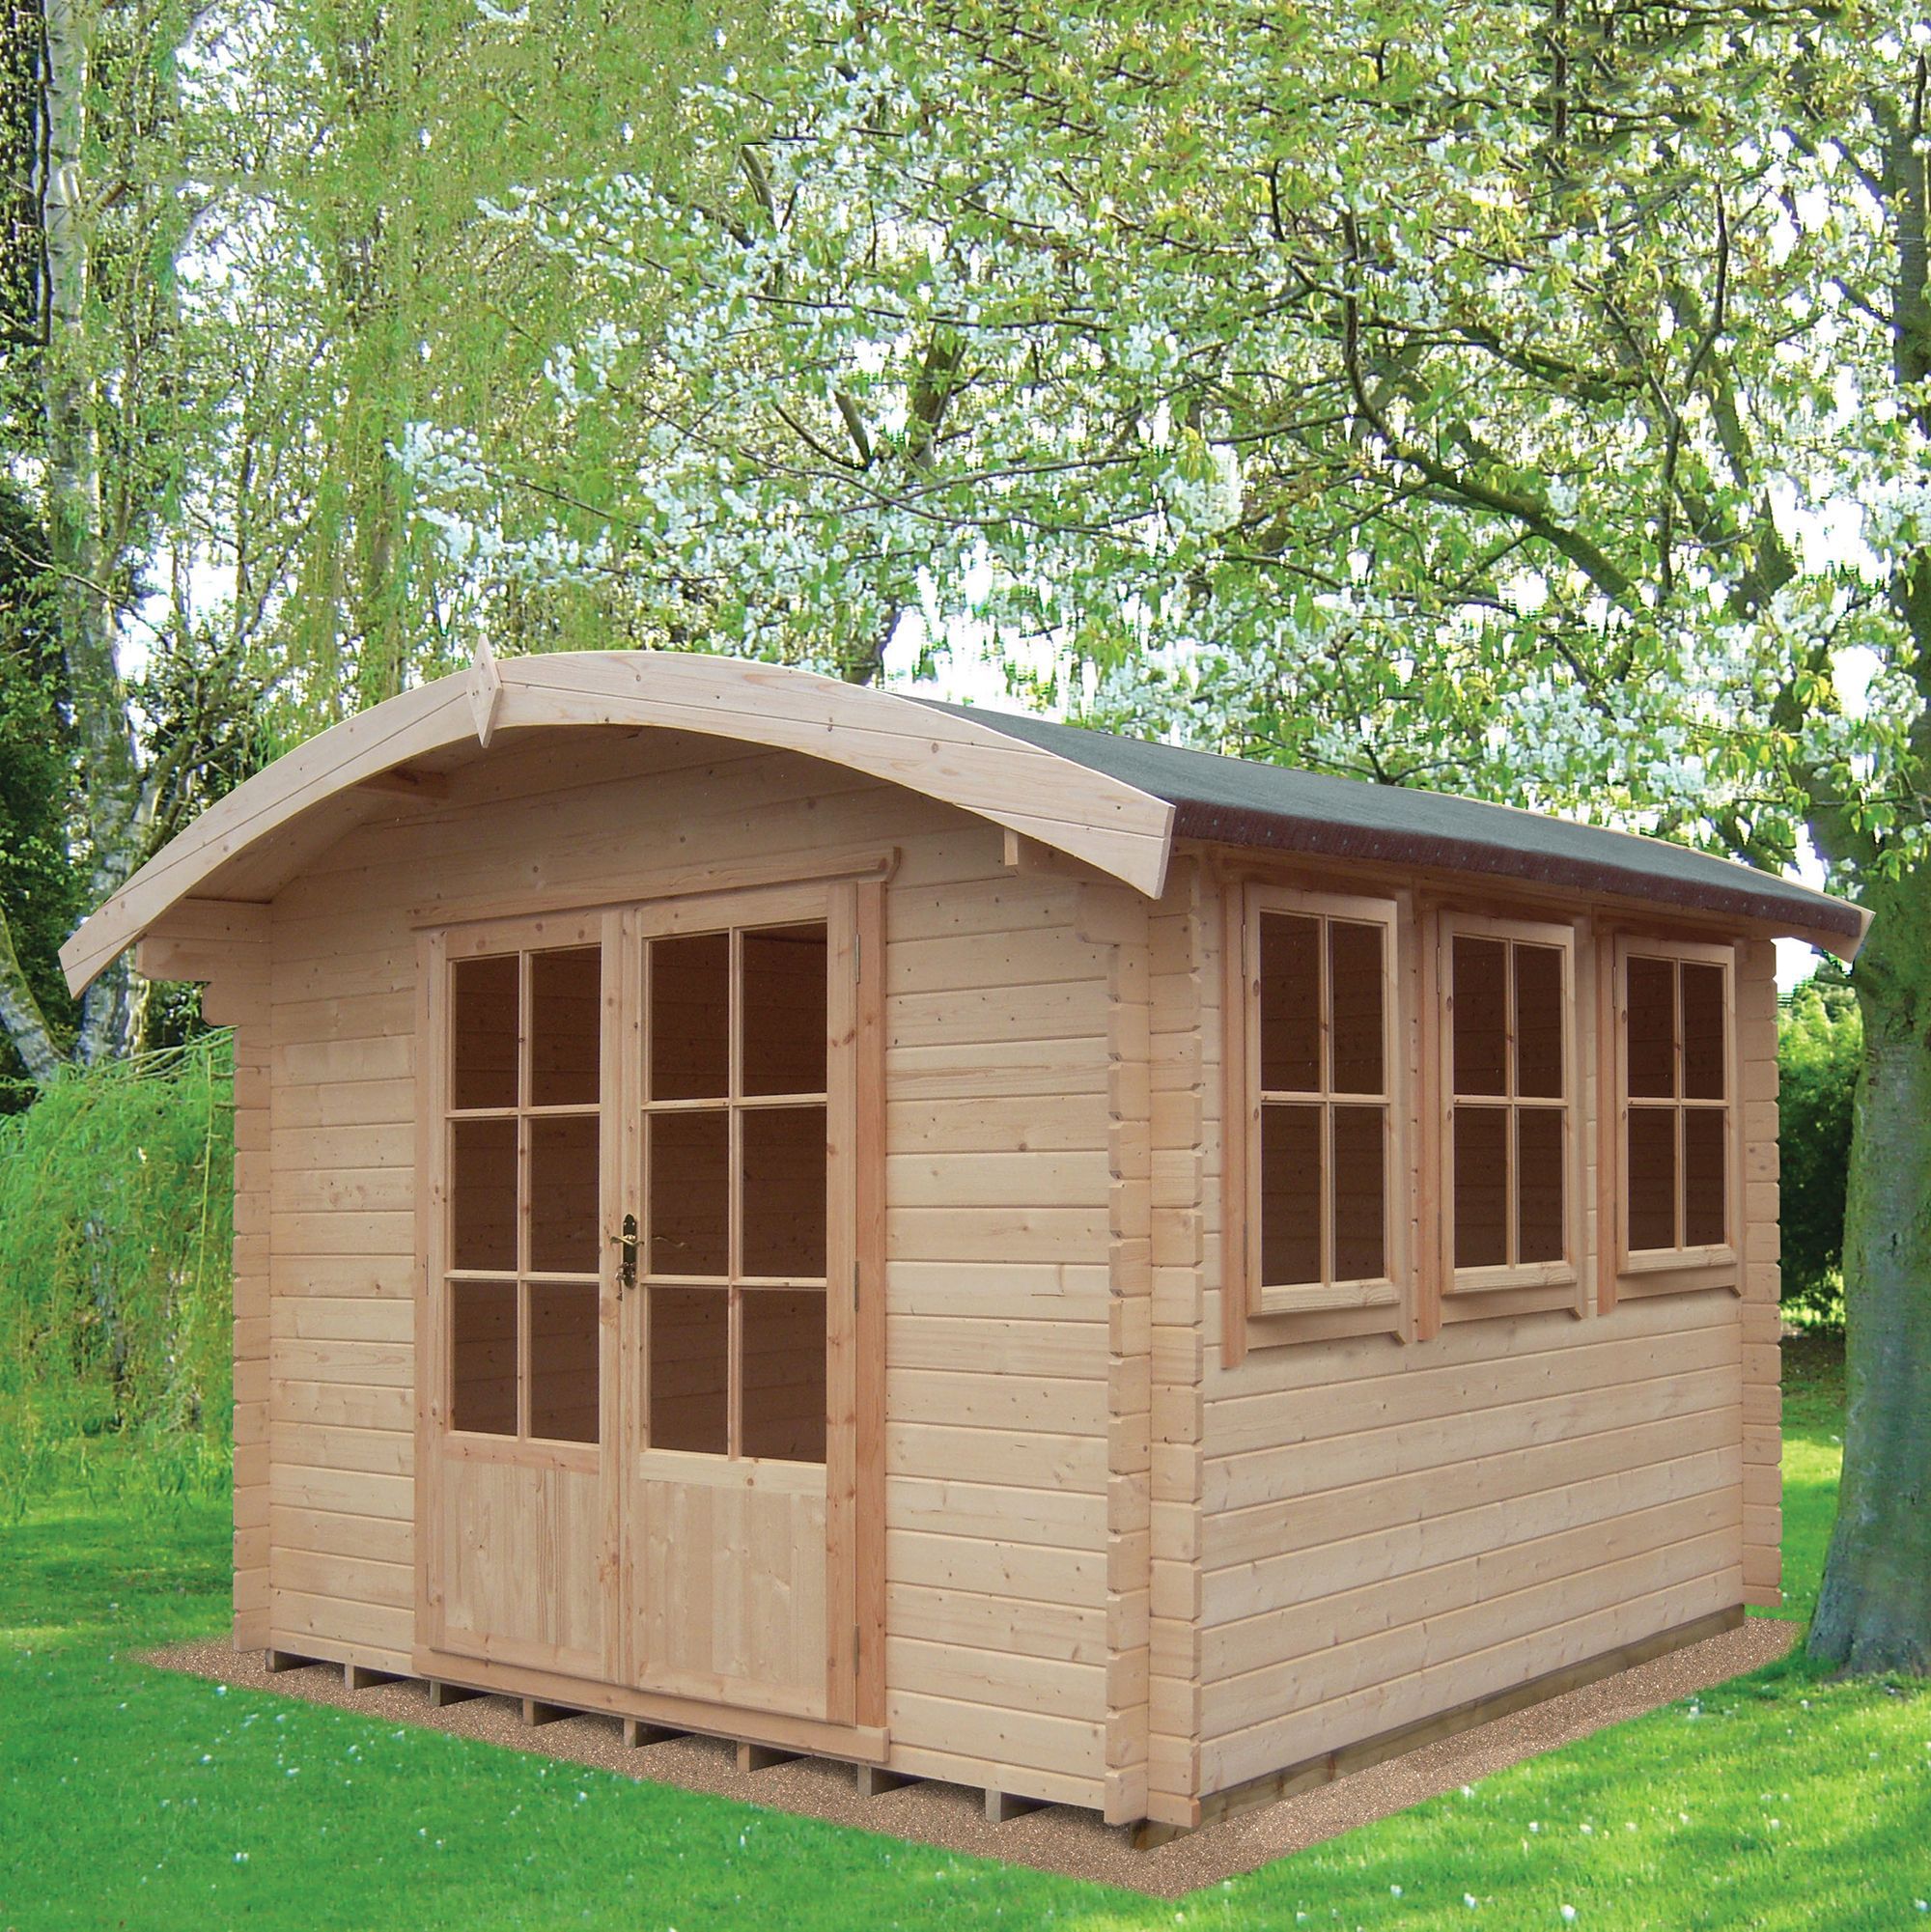 Shire Kilburn 12x12 ft Toughened glass & 3 windows Curved Wooden Cabin